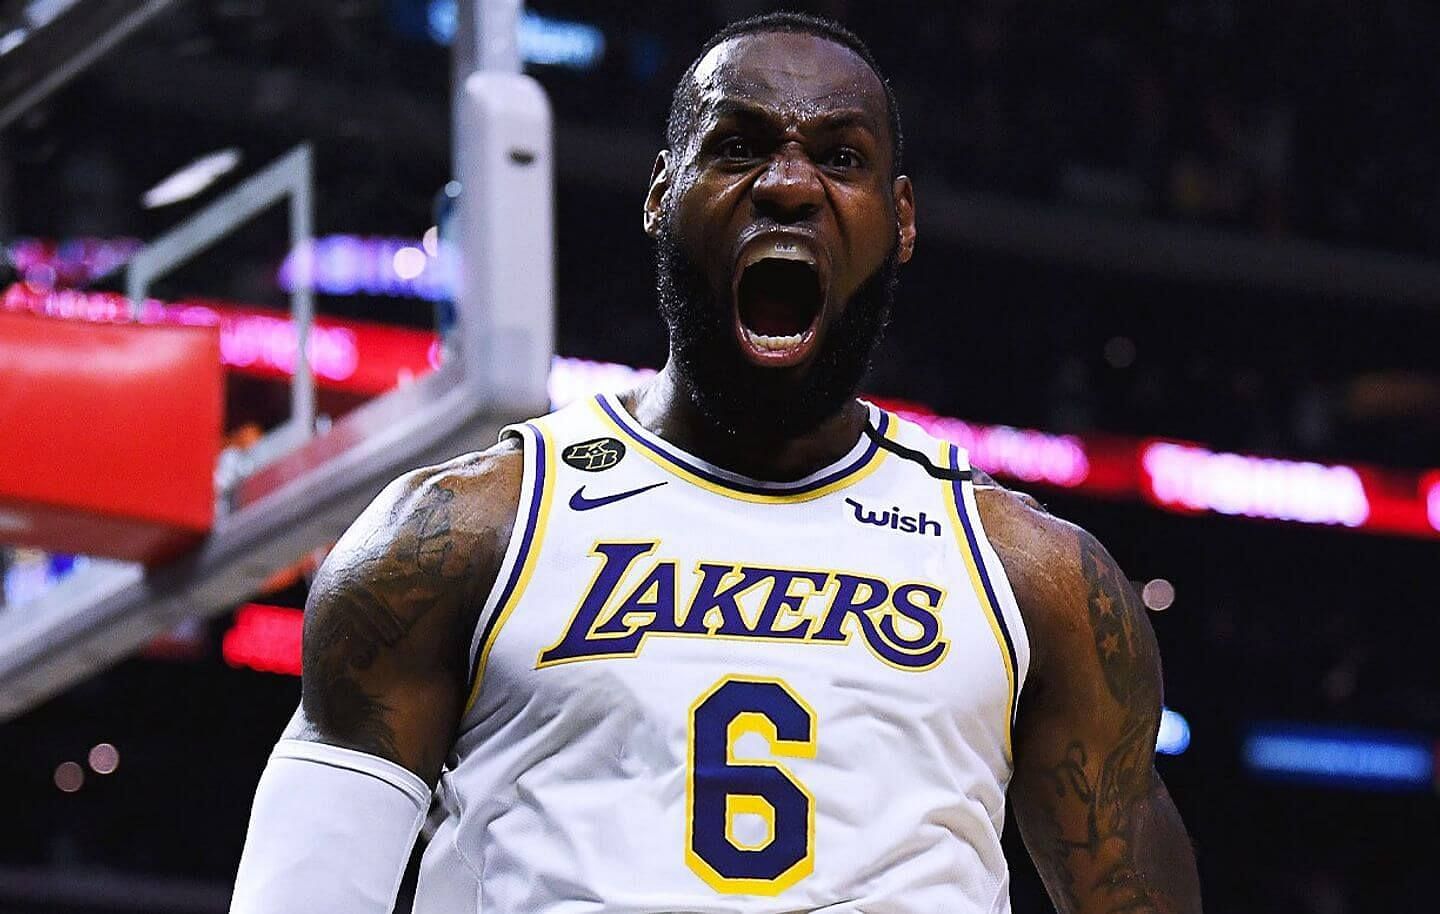 LeBron James inks 2-year, $97.1 million deal with Lakers